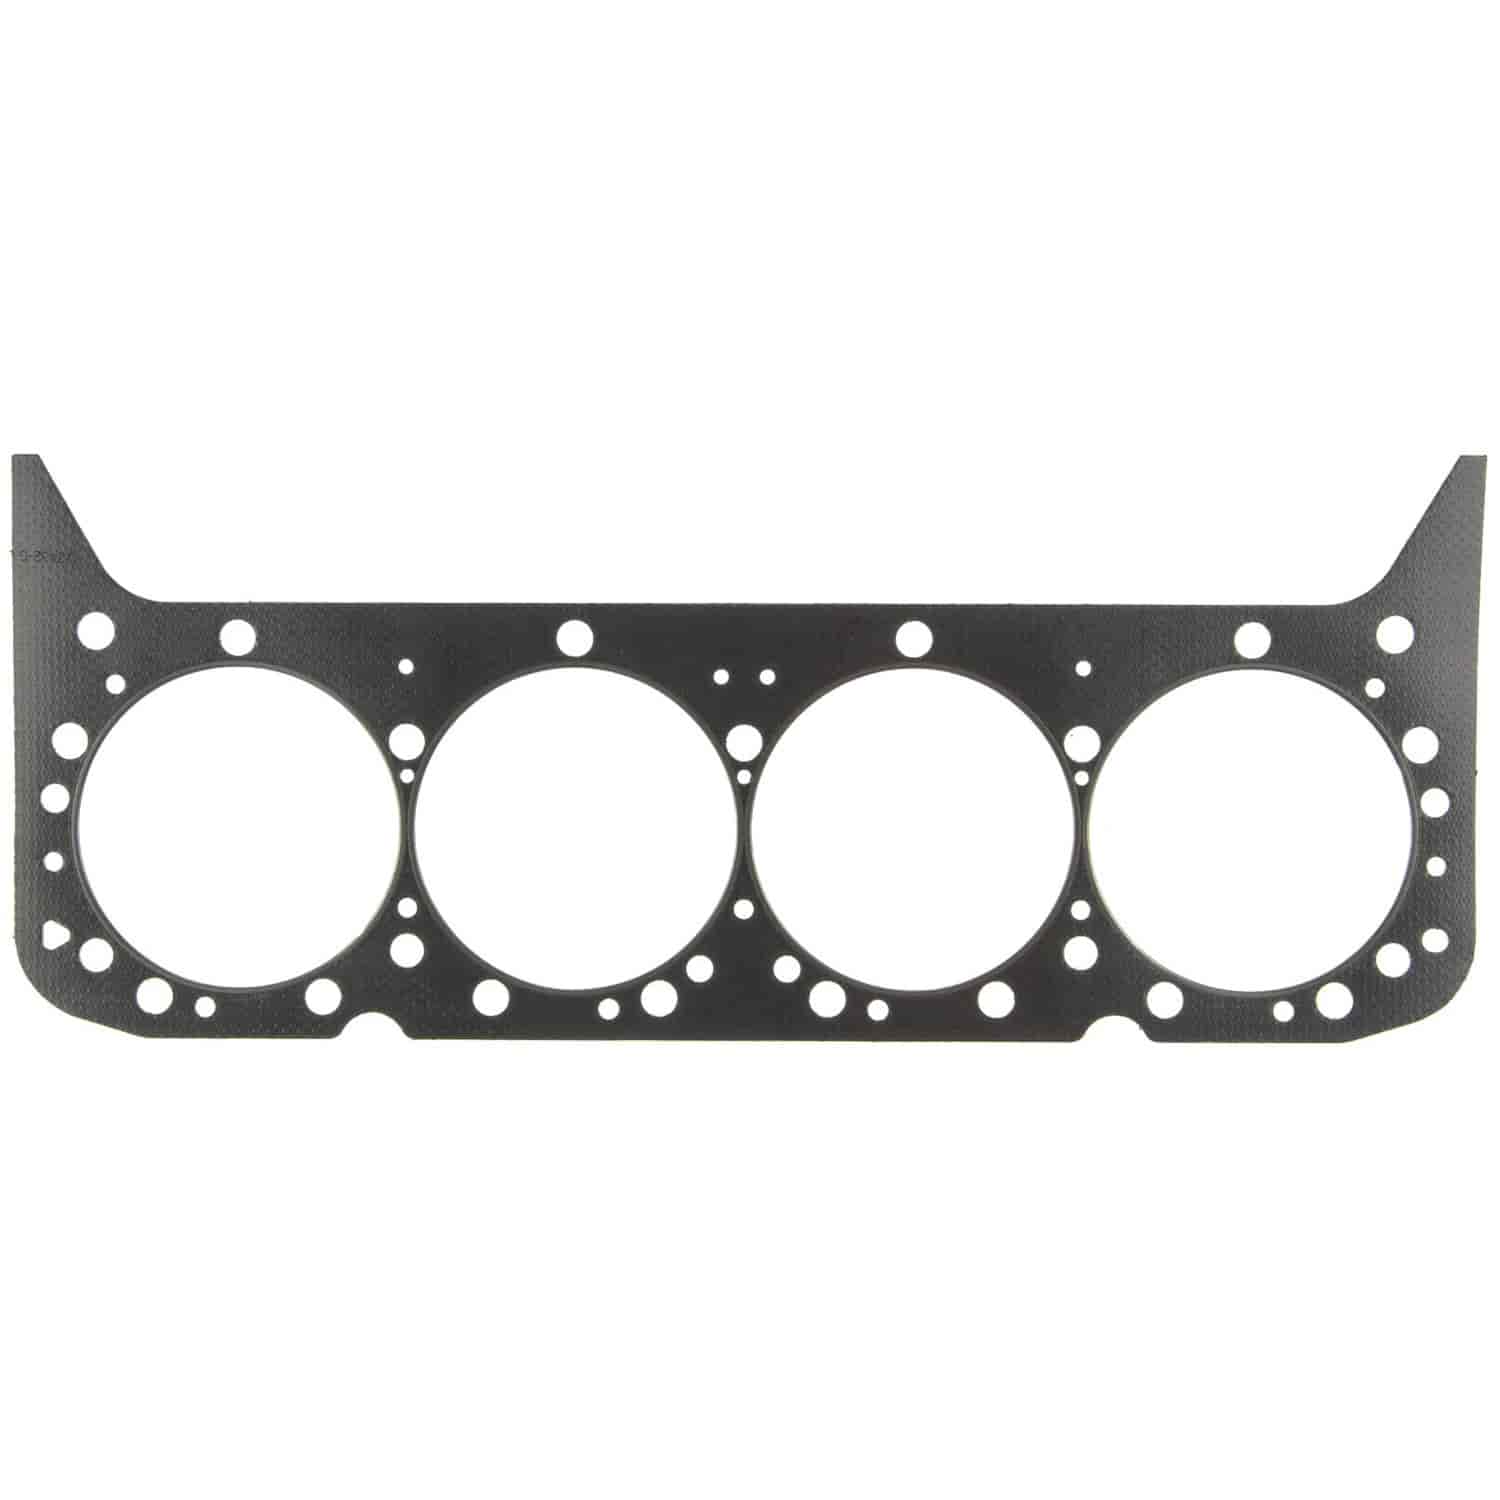 Performance Head Gasket 1962-2002 Small Block Chevy 302/327/350/400